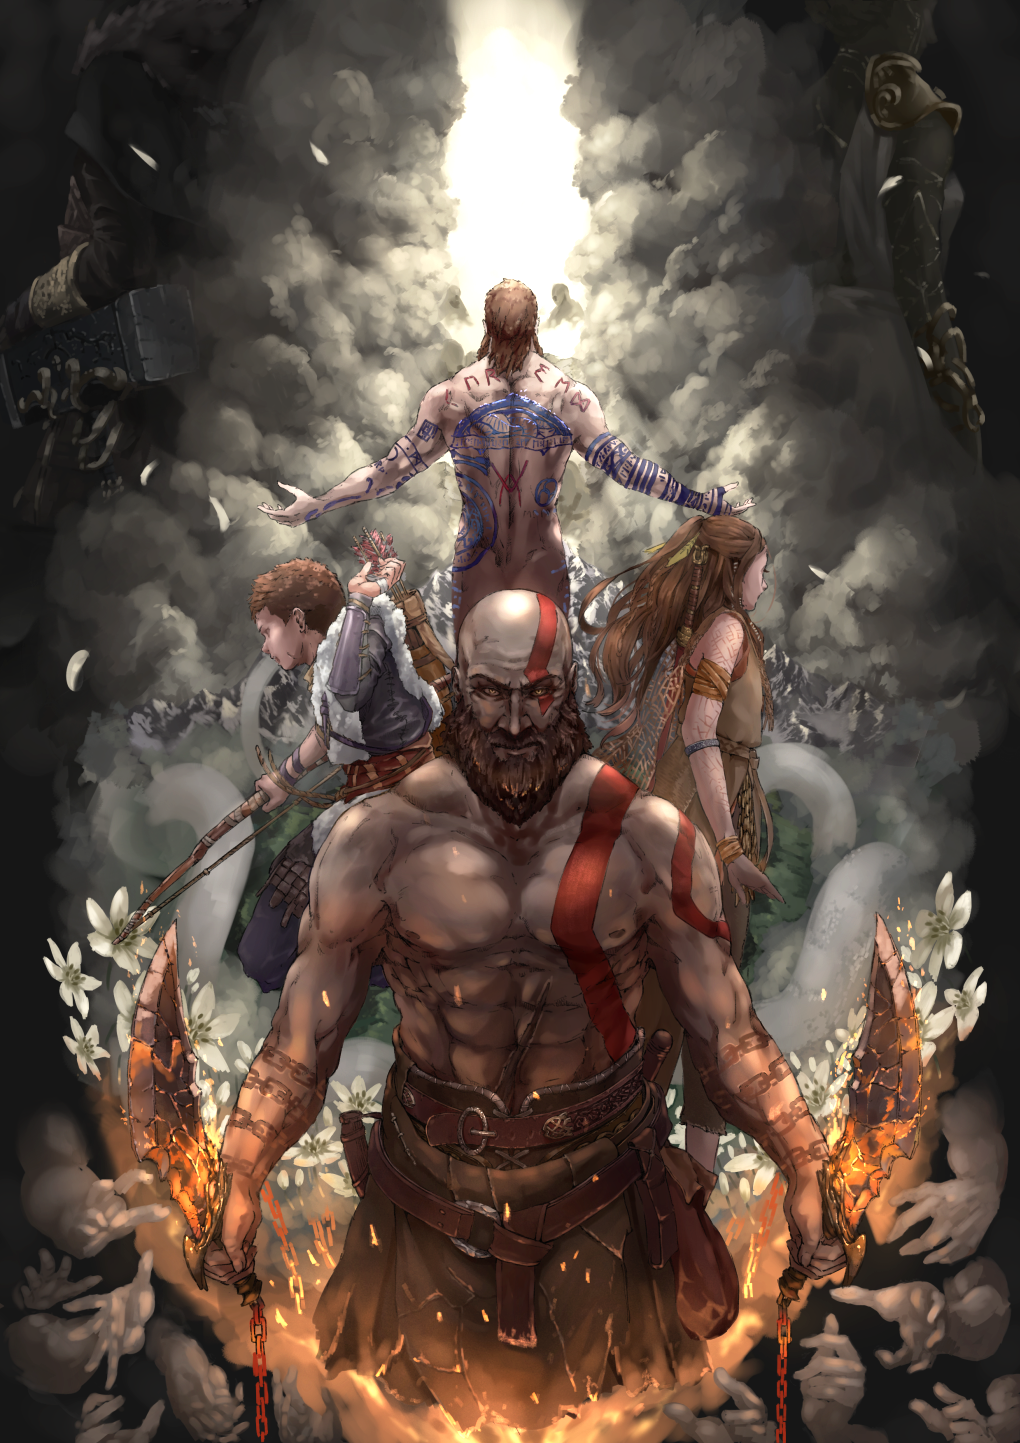 4boys abs arm_tattoo arrow athena_(god_of_war) atreus back back_tattoo bald baldur_(god_of_war) beard belt bodypaint bow_(weapon) brown_hair chain chest closed_mouth dress dual_wielding facial_hair facial_tattoo facing_away father_and_son fire flower freya_(god_of_war) glowing god_of_war hammer hands highres holding holding_weapon kratos long_hair long_sleeves looking_afar looking_at_viewer medium_hair mother_and_son multiple_boys multiple_girls muscle nagi_(xx001122) nipples nude scar shirt shirtless short_hair smoke sparks spoilers tattoo thor_(god_of_war) weapon white_flower